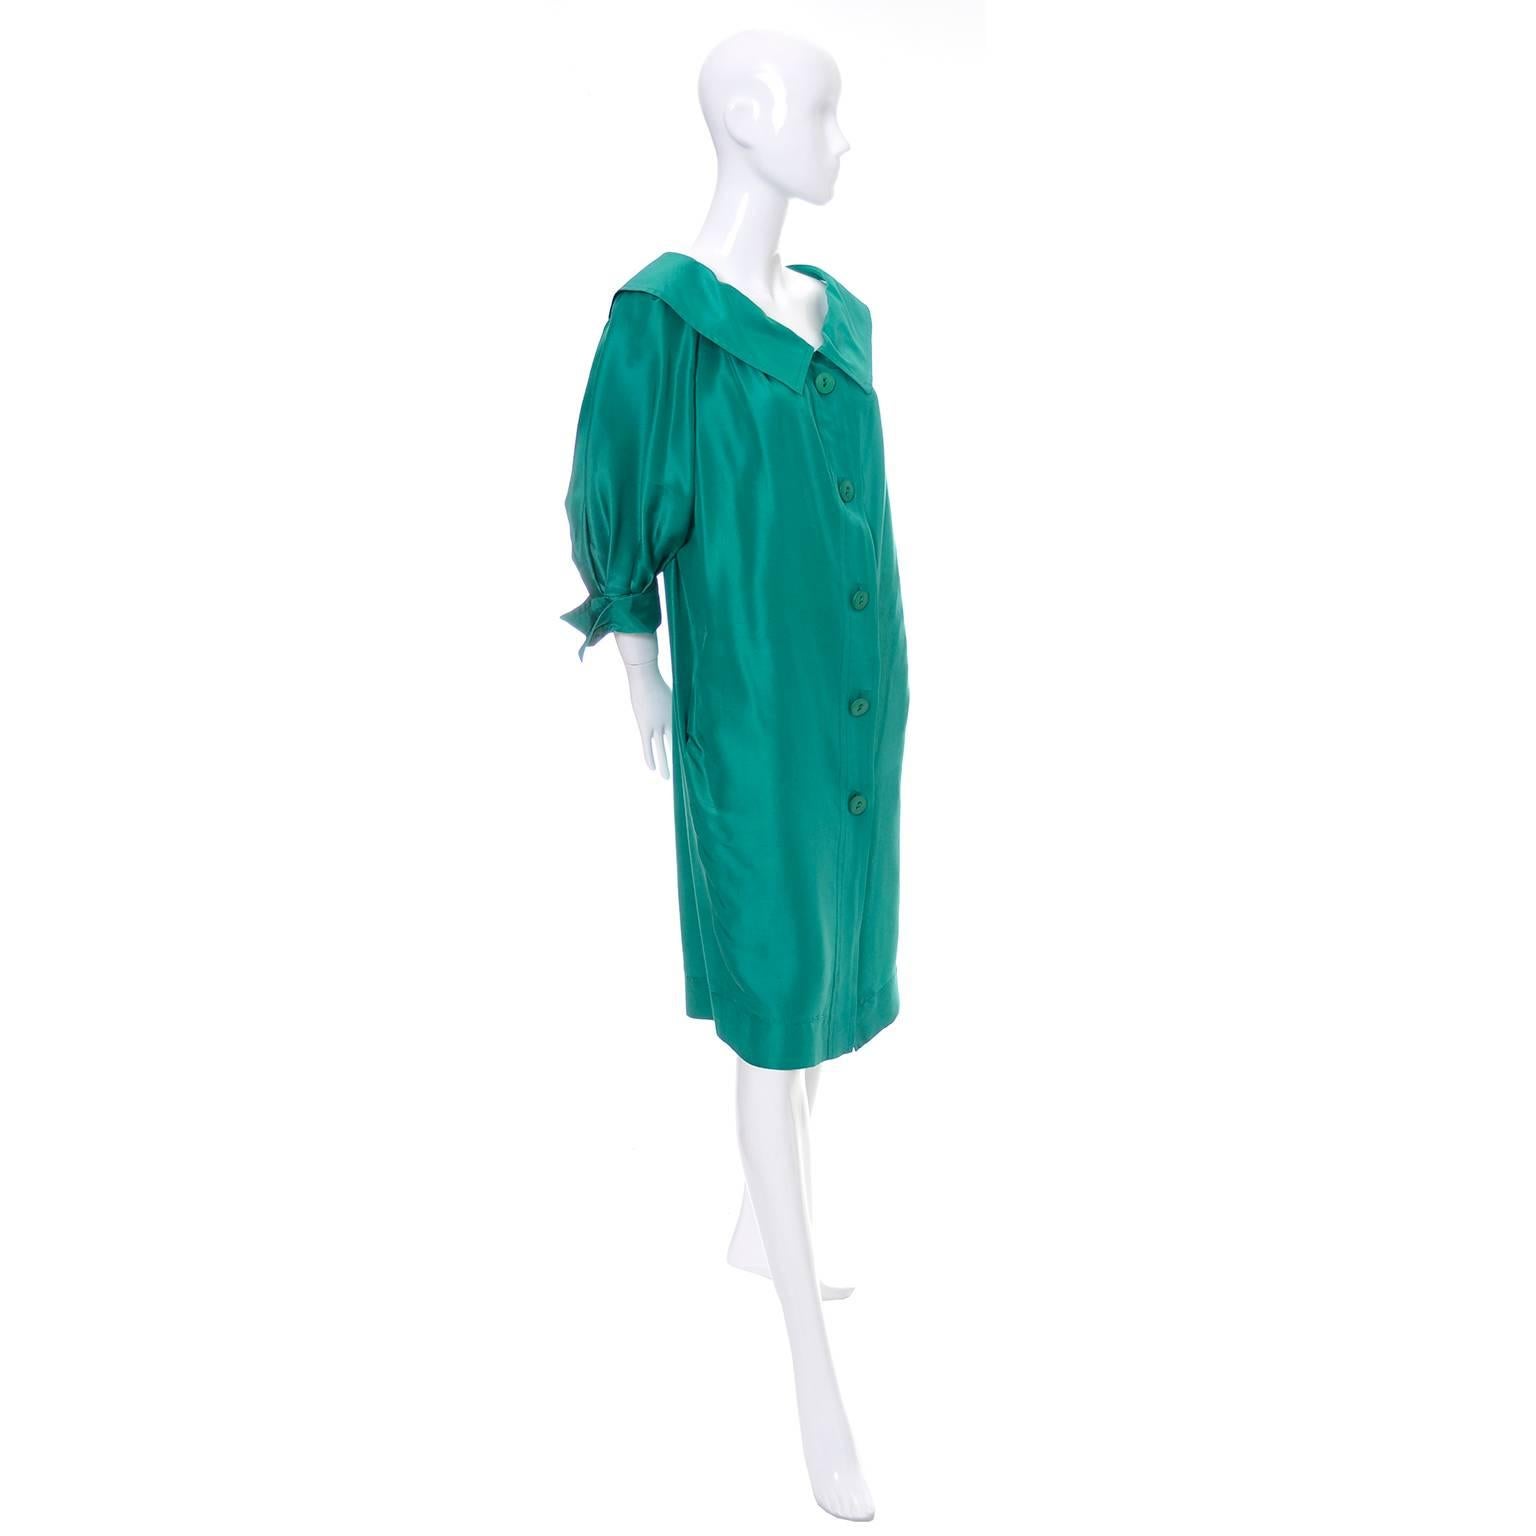 This is a late 1970's vintage YSL green silk dress with buttons up the front.  The dress has side pockets, pretty detailed cuffs on the 3/4 length puffed sleeves, and is labeled a size 38 (Approximately a US size 6). This Yves Saint Laurent dress